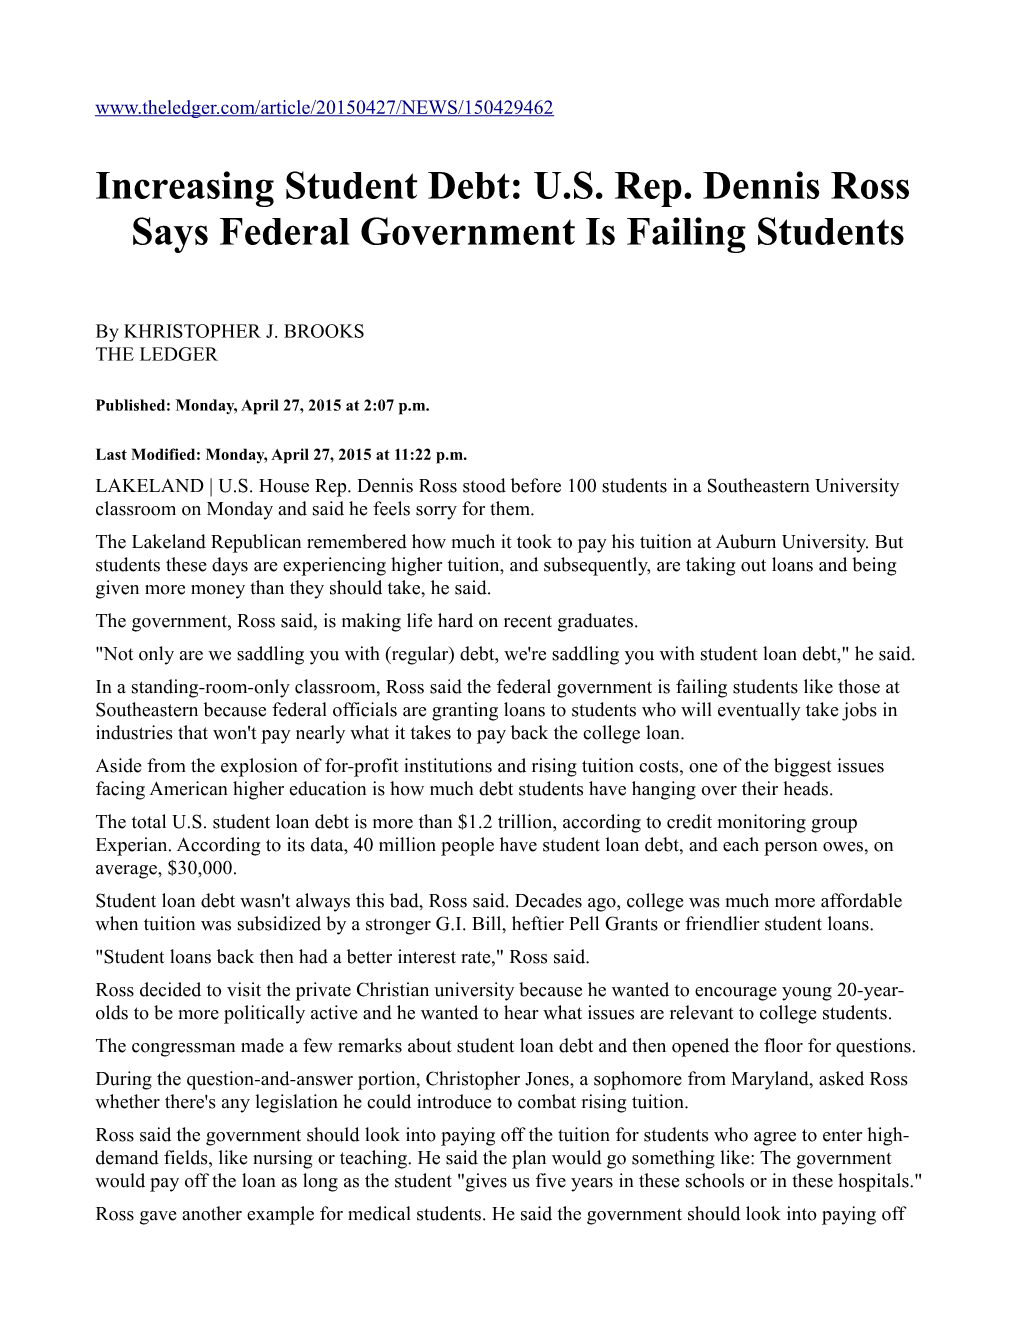 Increasing Student Debt: U.S. Rep. Dennis Ross Says Federal Government Is Failing Students